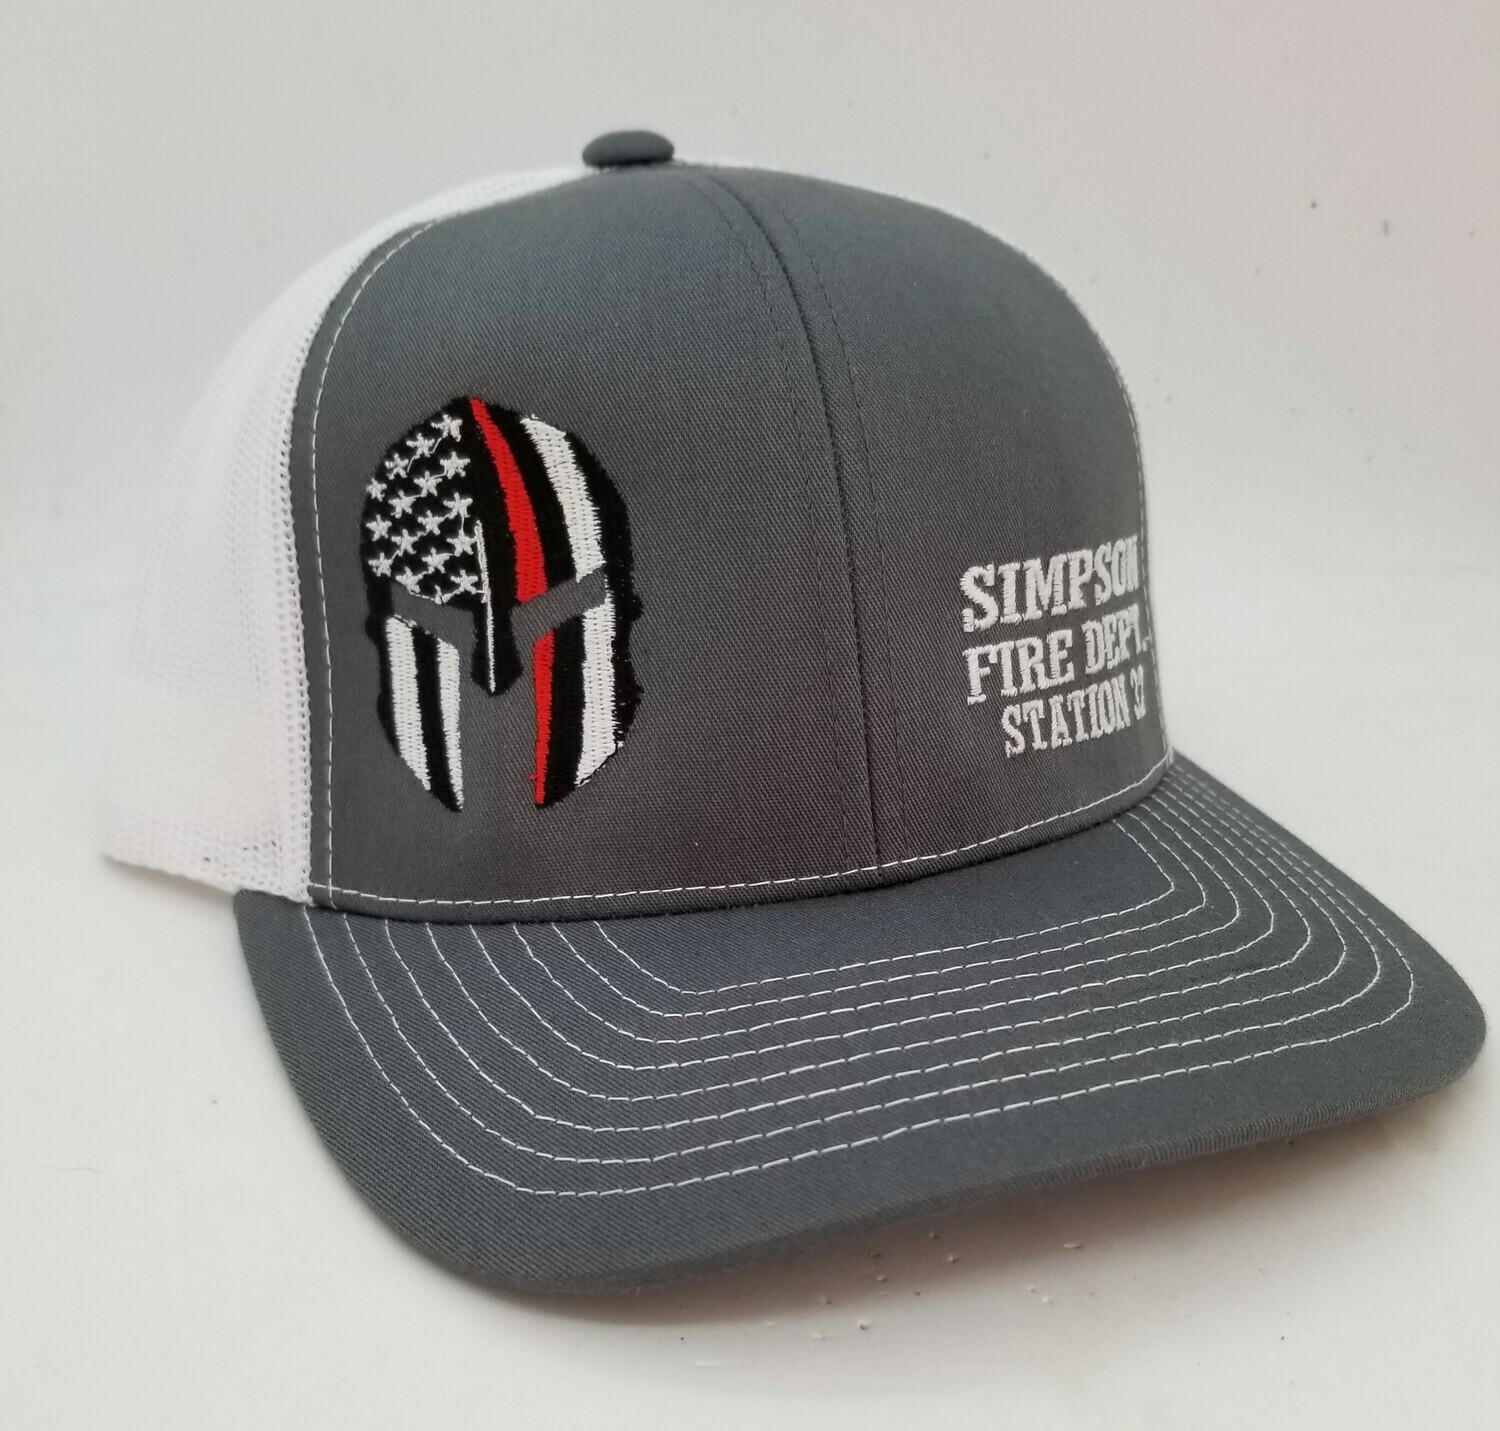 Custom Fire Department Red Stripe Helmet Adjustable Hat - Many Hat Colors Available!!!